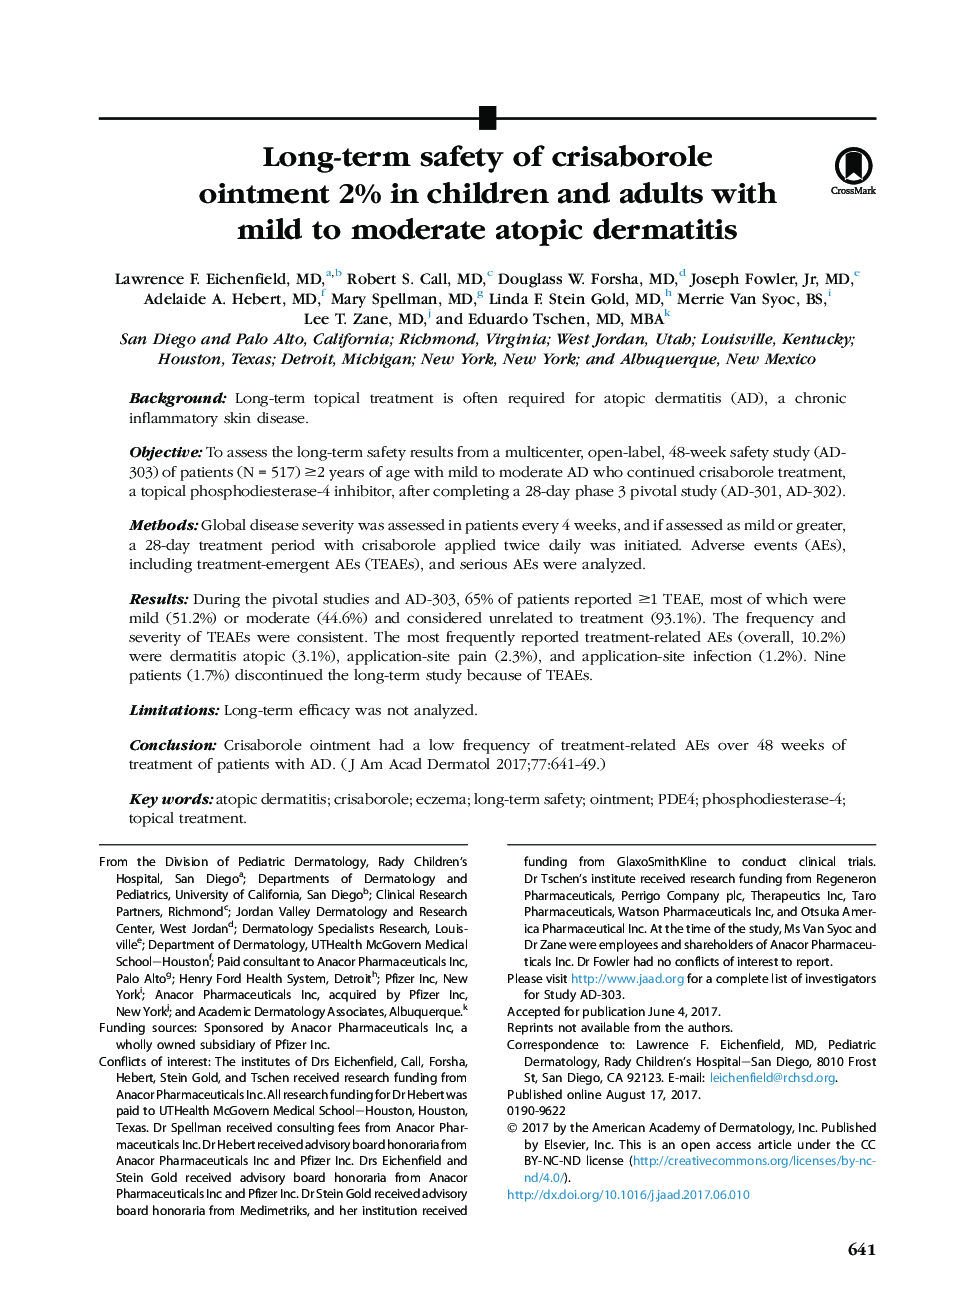 Long-term safety of crisaborole ointment 2% in children and adults with mild to moderate atopic dermatitis